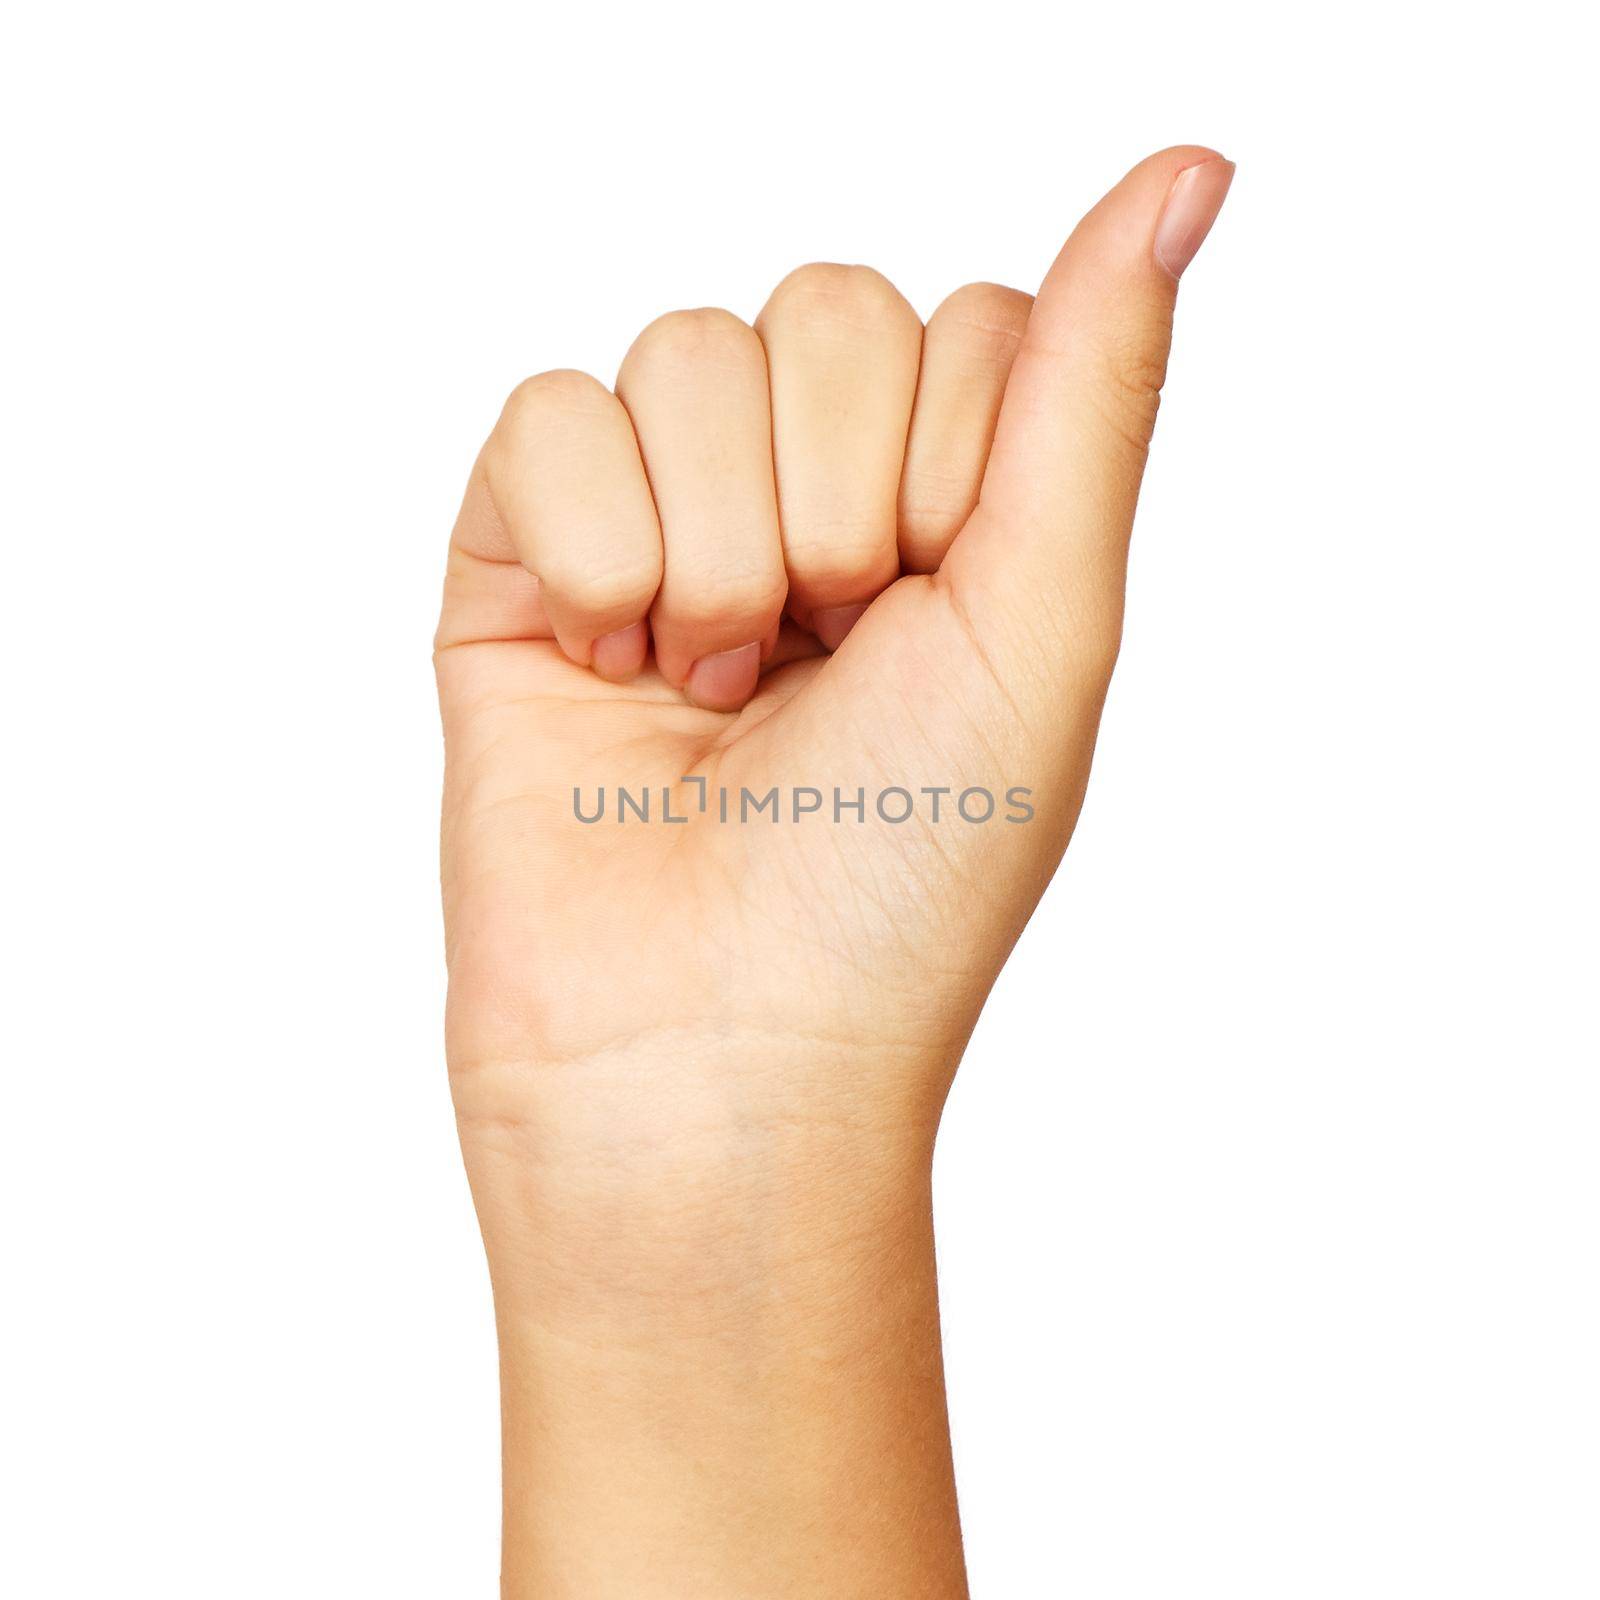 american sign language. female hand showing letter a. isolated on white background